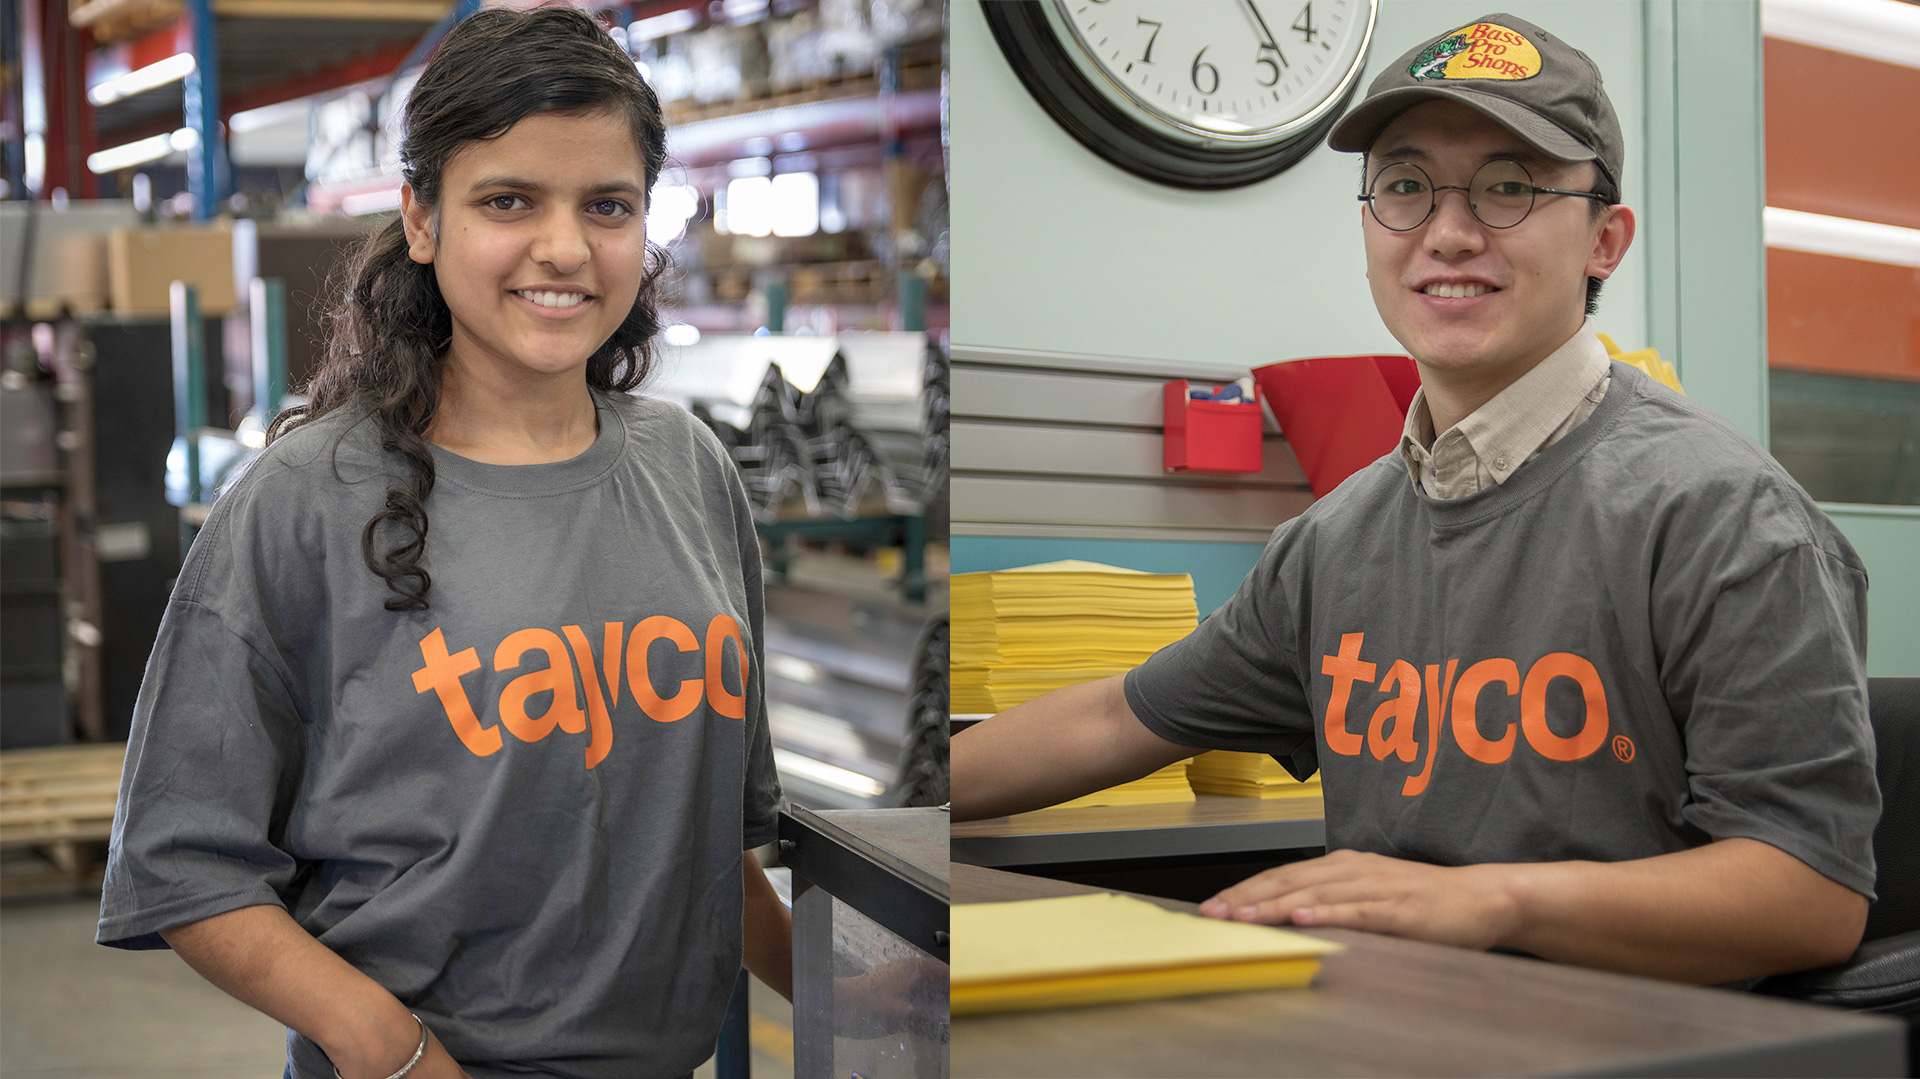 <h1>Employee Profile: Tayco’s Summer Students</h1>